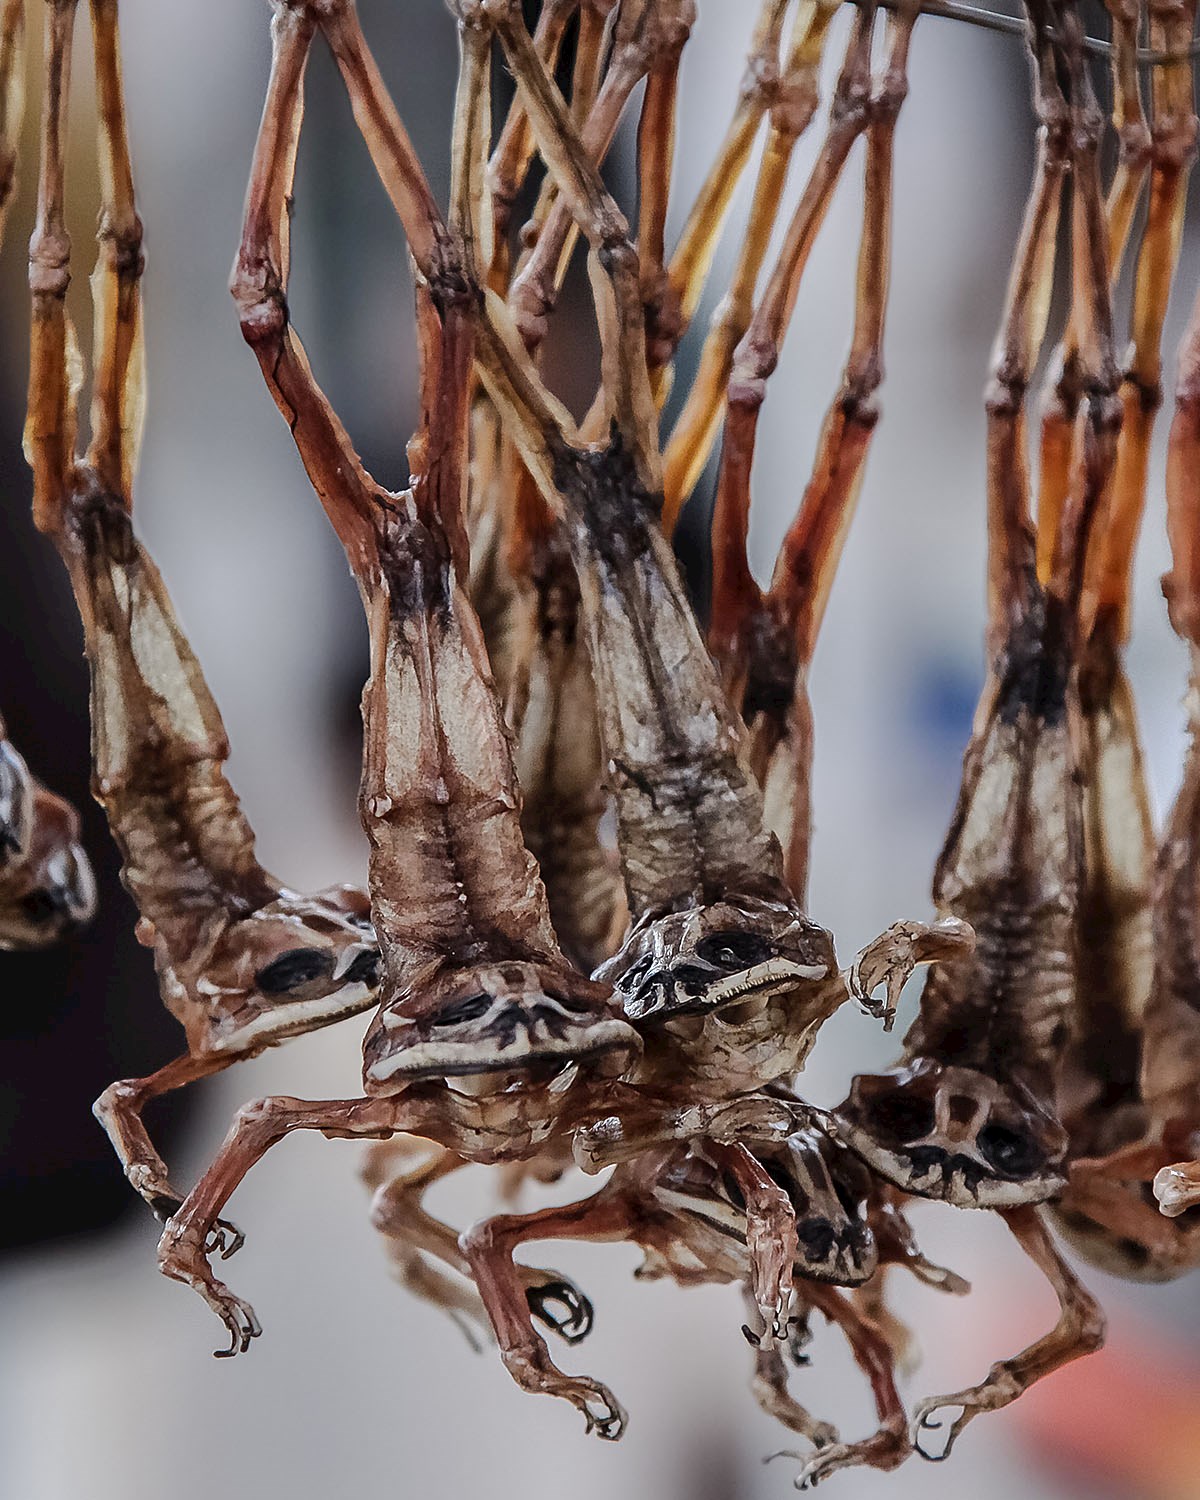 Dried frog legs are just one of the exotic things one might find in the Arequipan markets - 